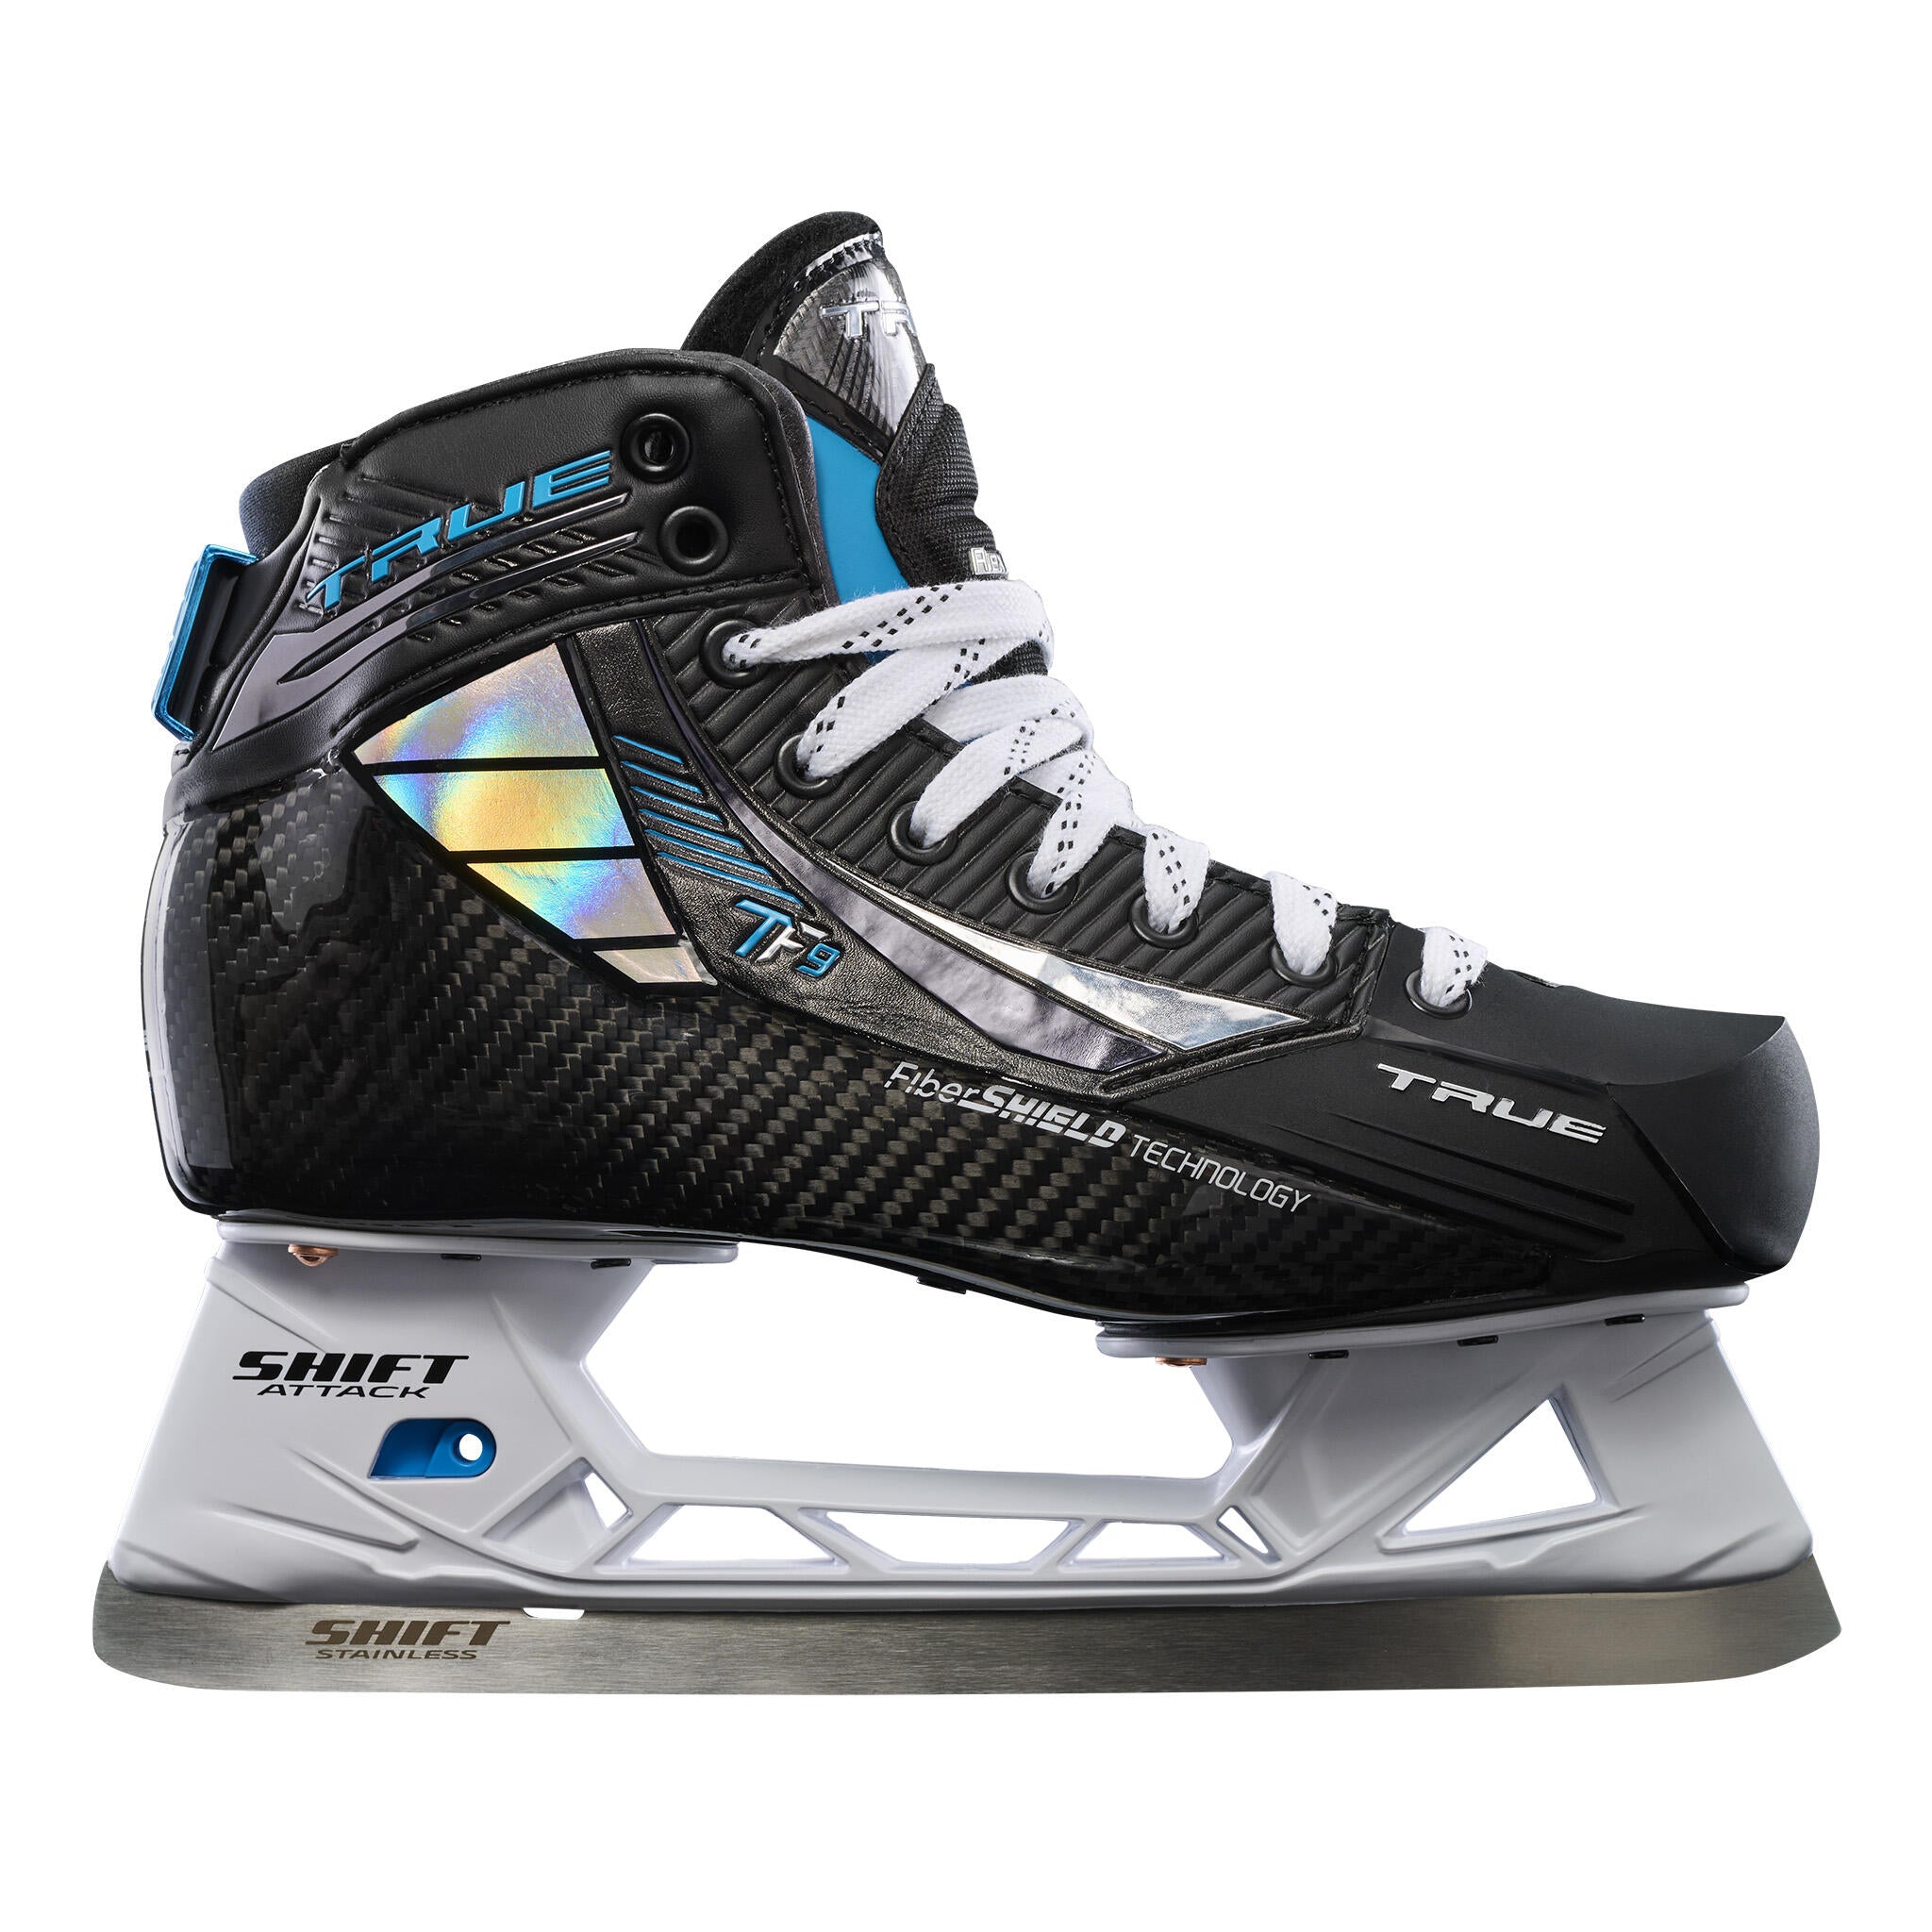 CCM SUPER RAPIDE mens ice hockey skates size 9 FOR BEGINNERS